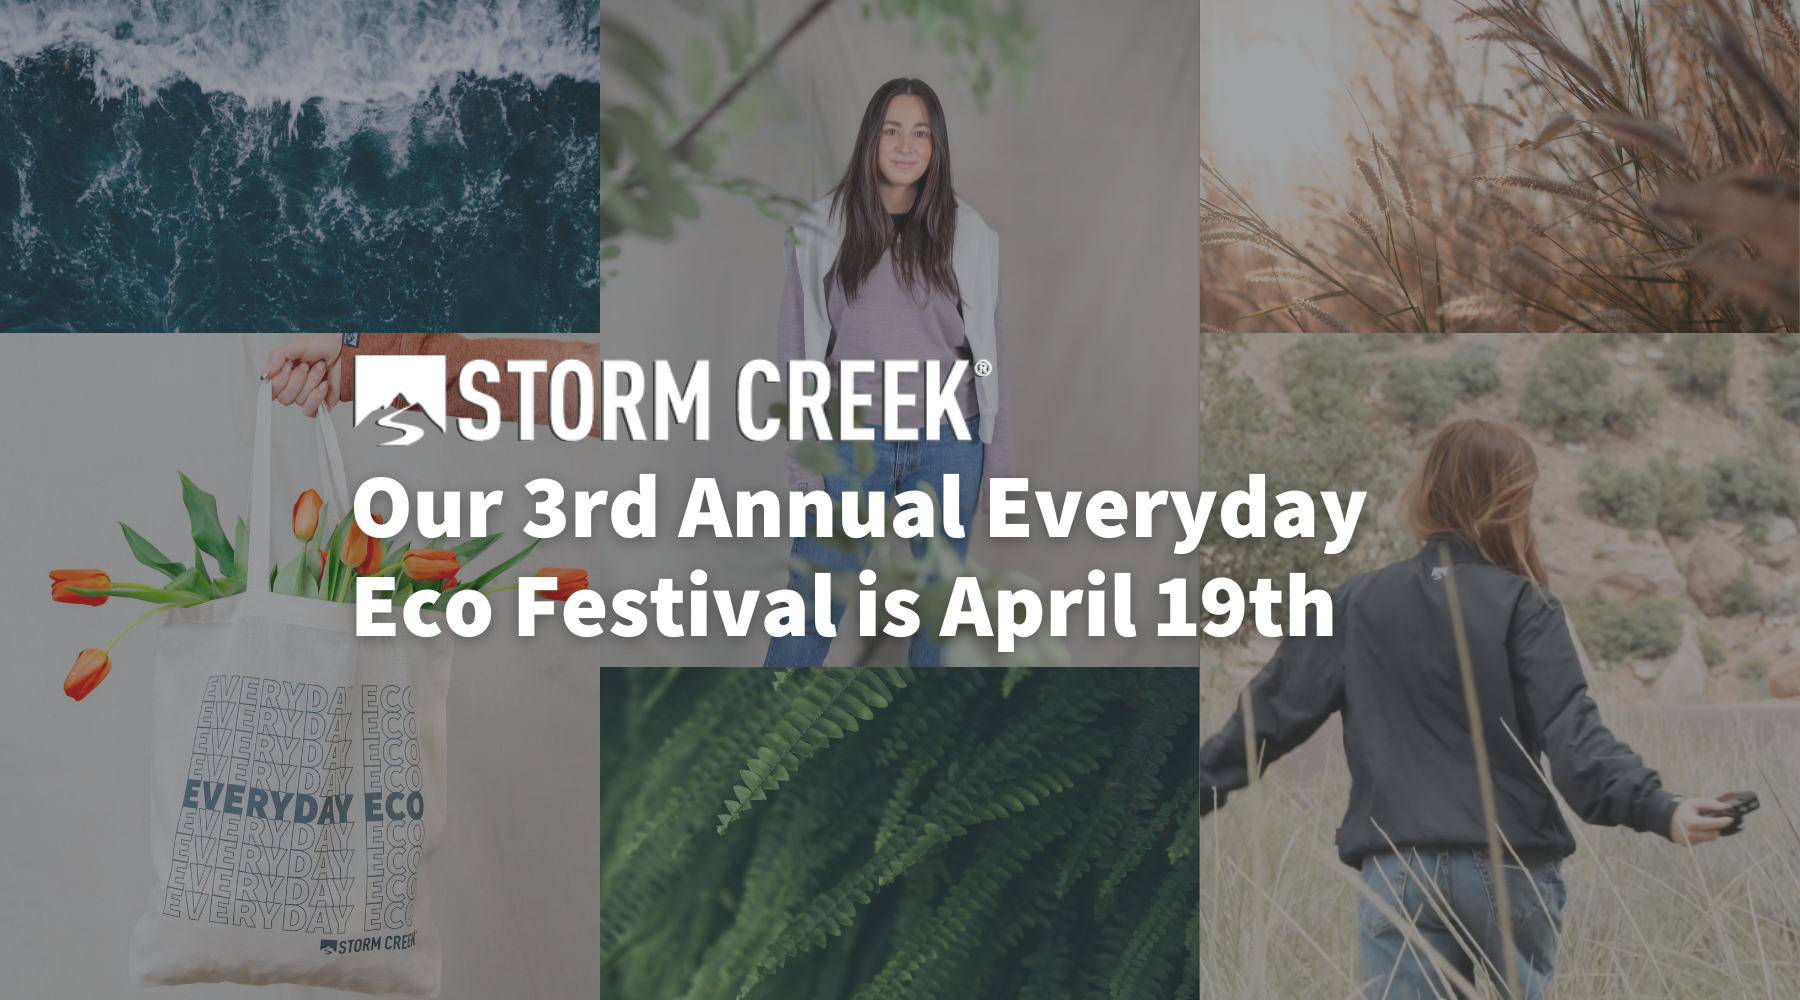 Storm Creek’s 3rd Annual Everyday Eco Festival